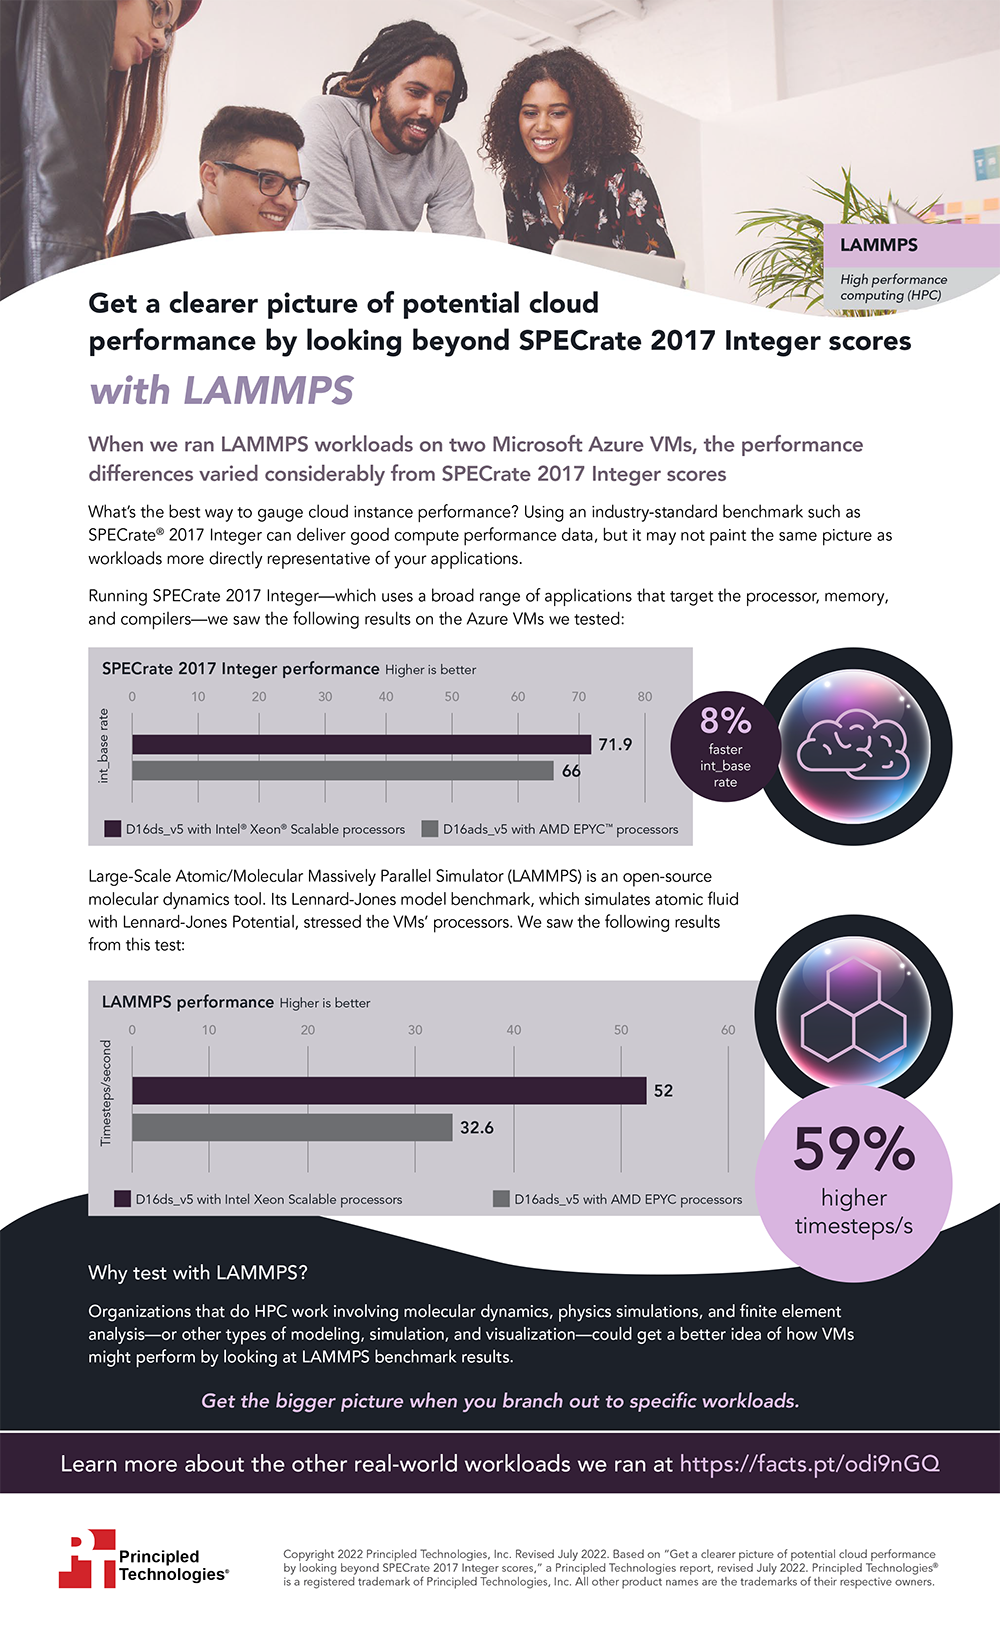 Get a clearer picture of potential cloud performance by looking beyond SPECrate 2017 Integer scores with LAMMPS - Infographic